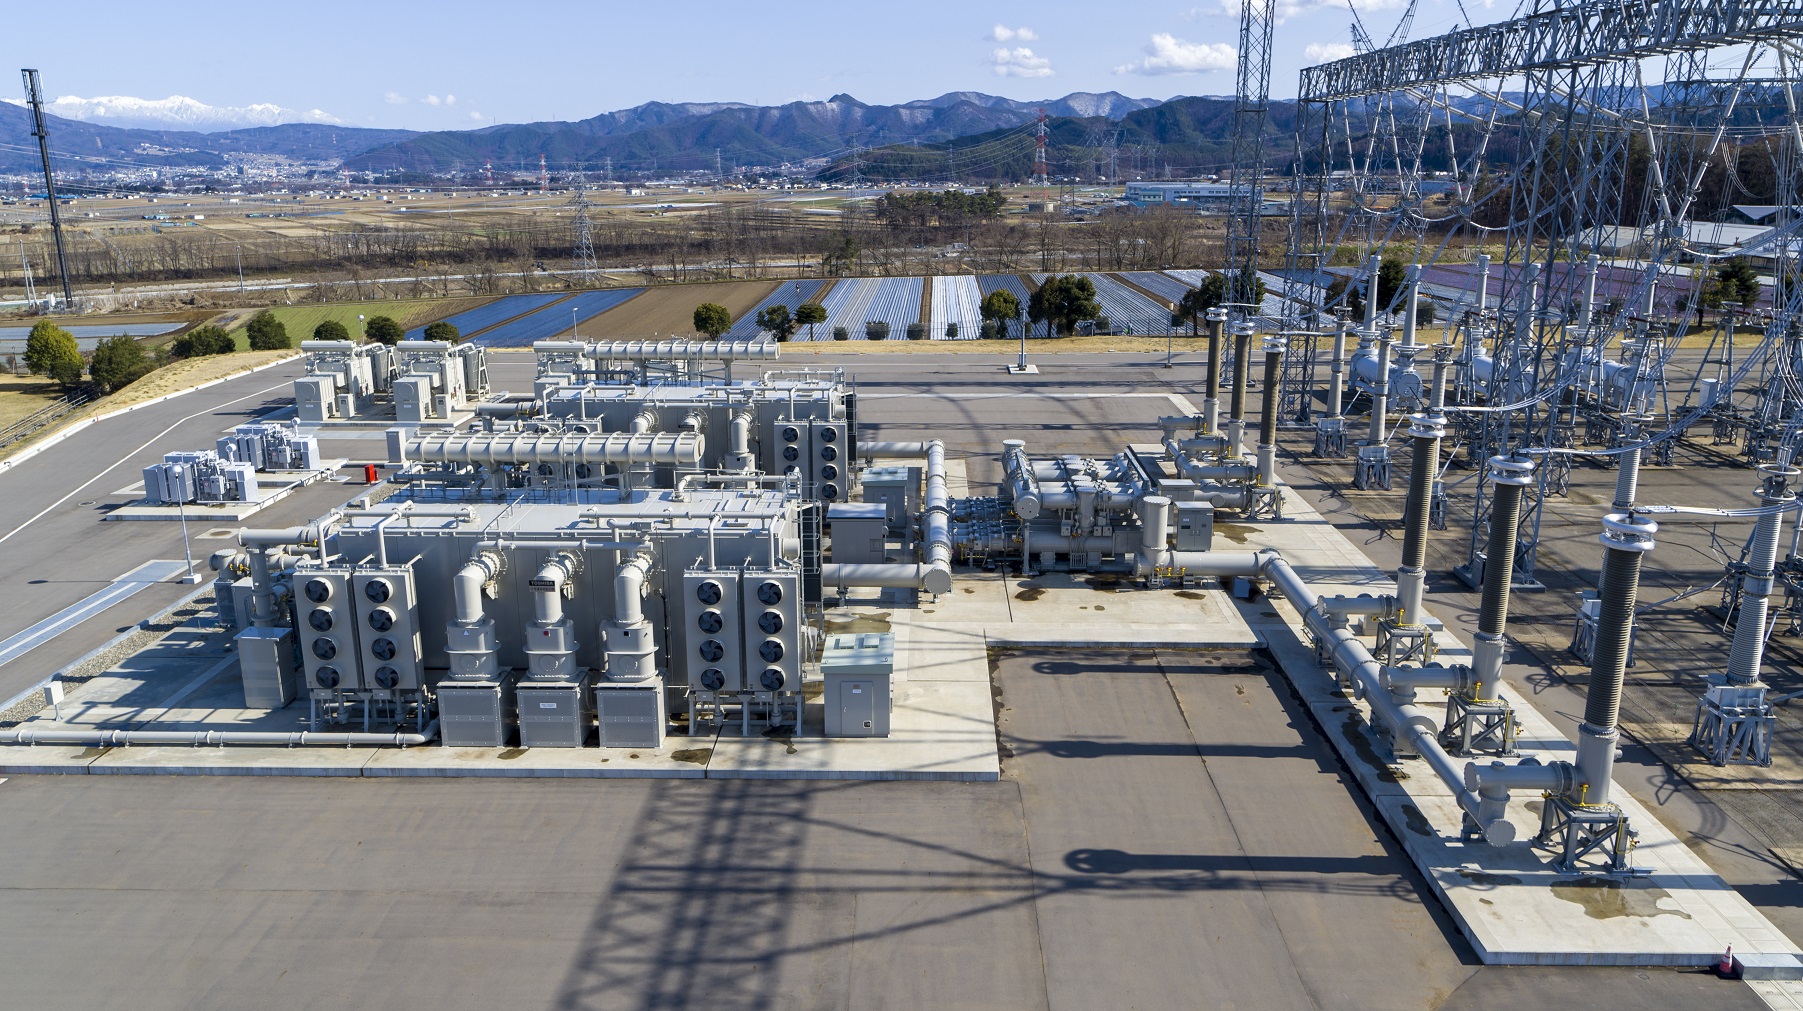 550-kV Gas-Insulated Switchgears and Transformer for Interconnection